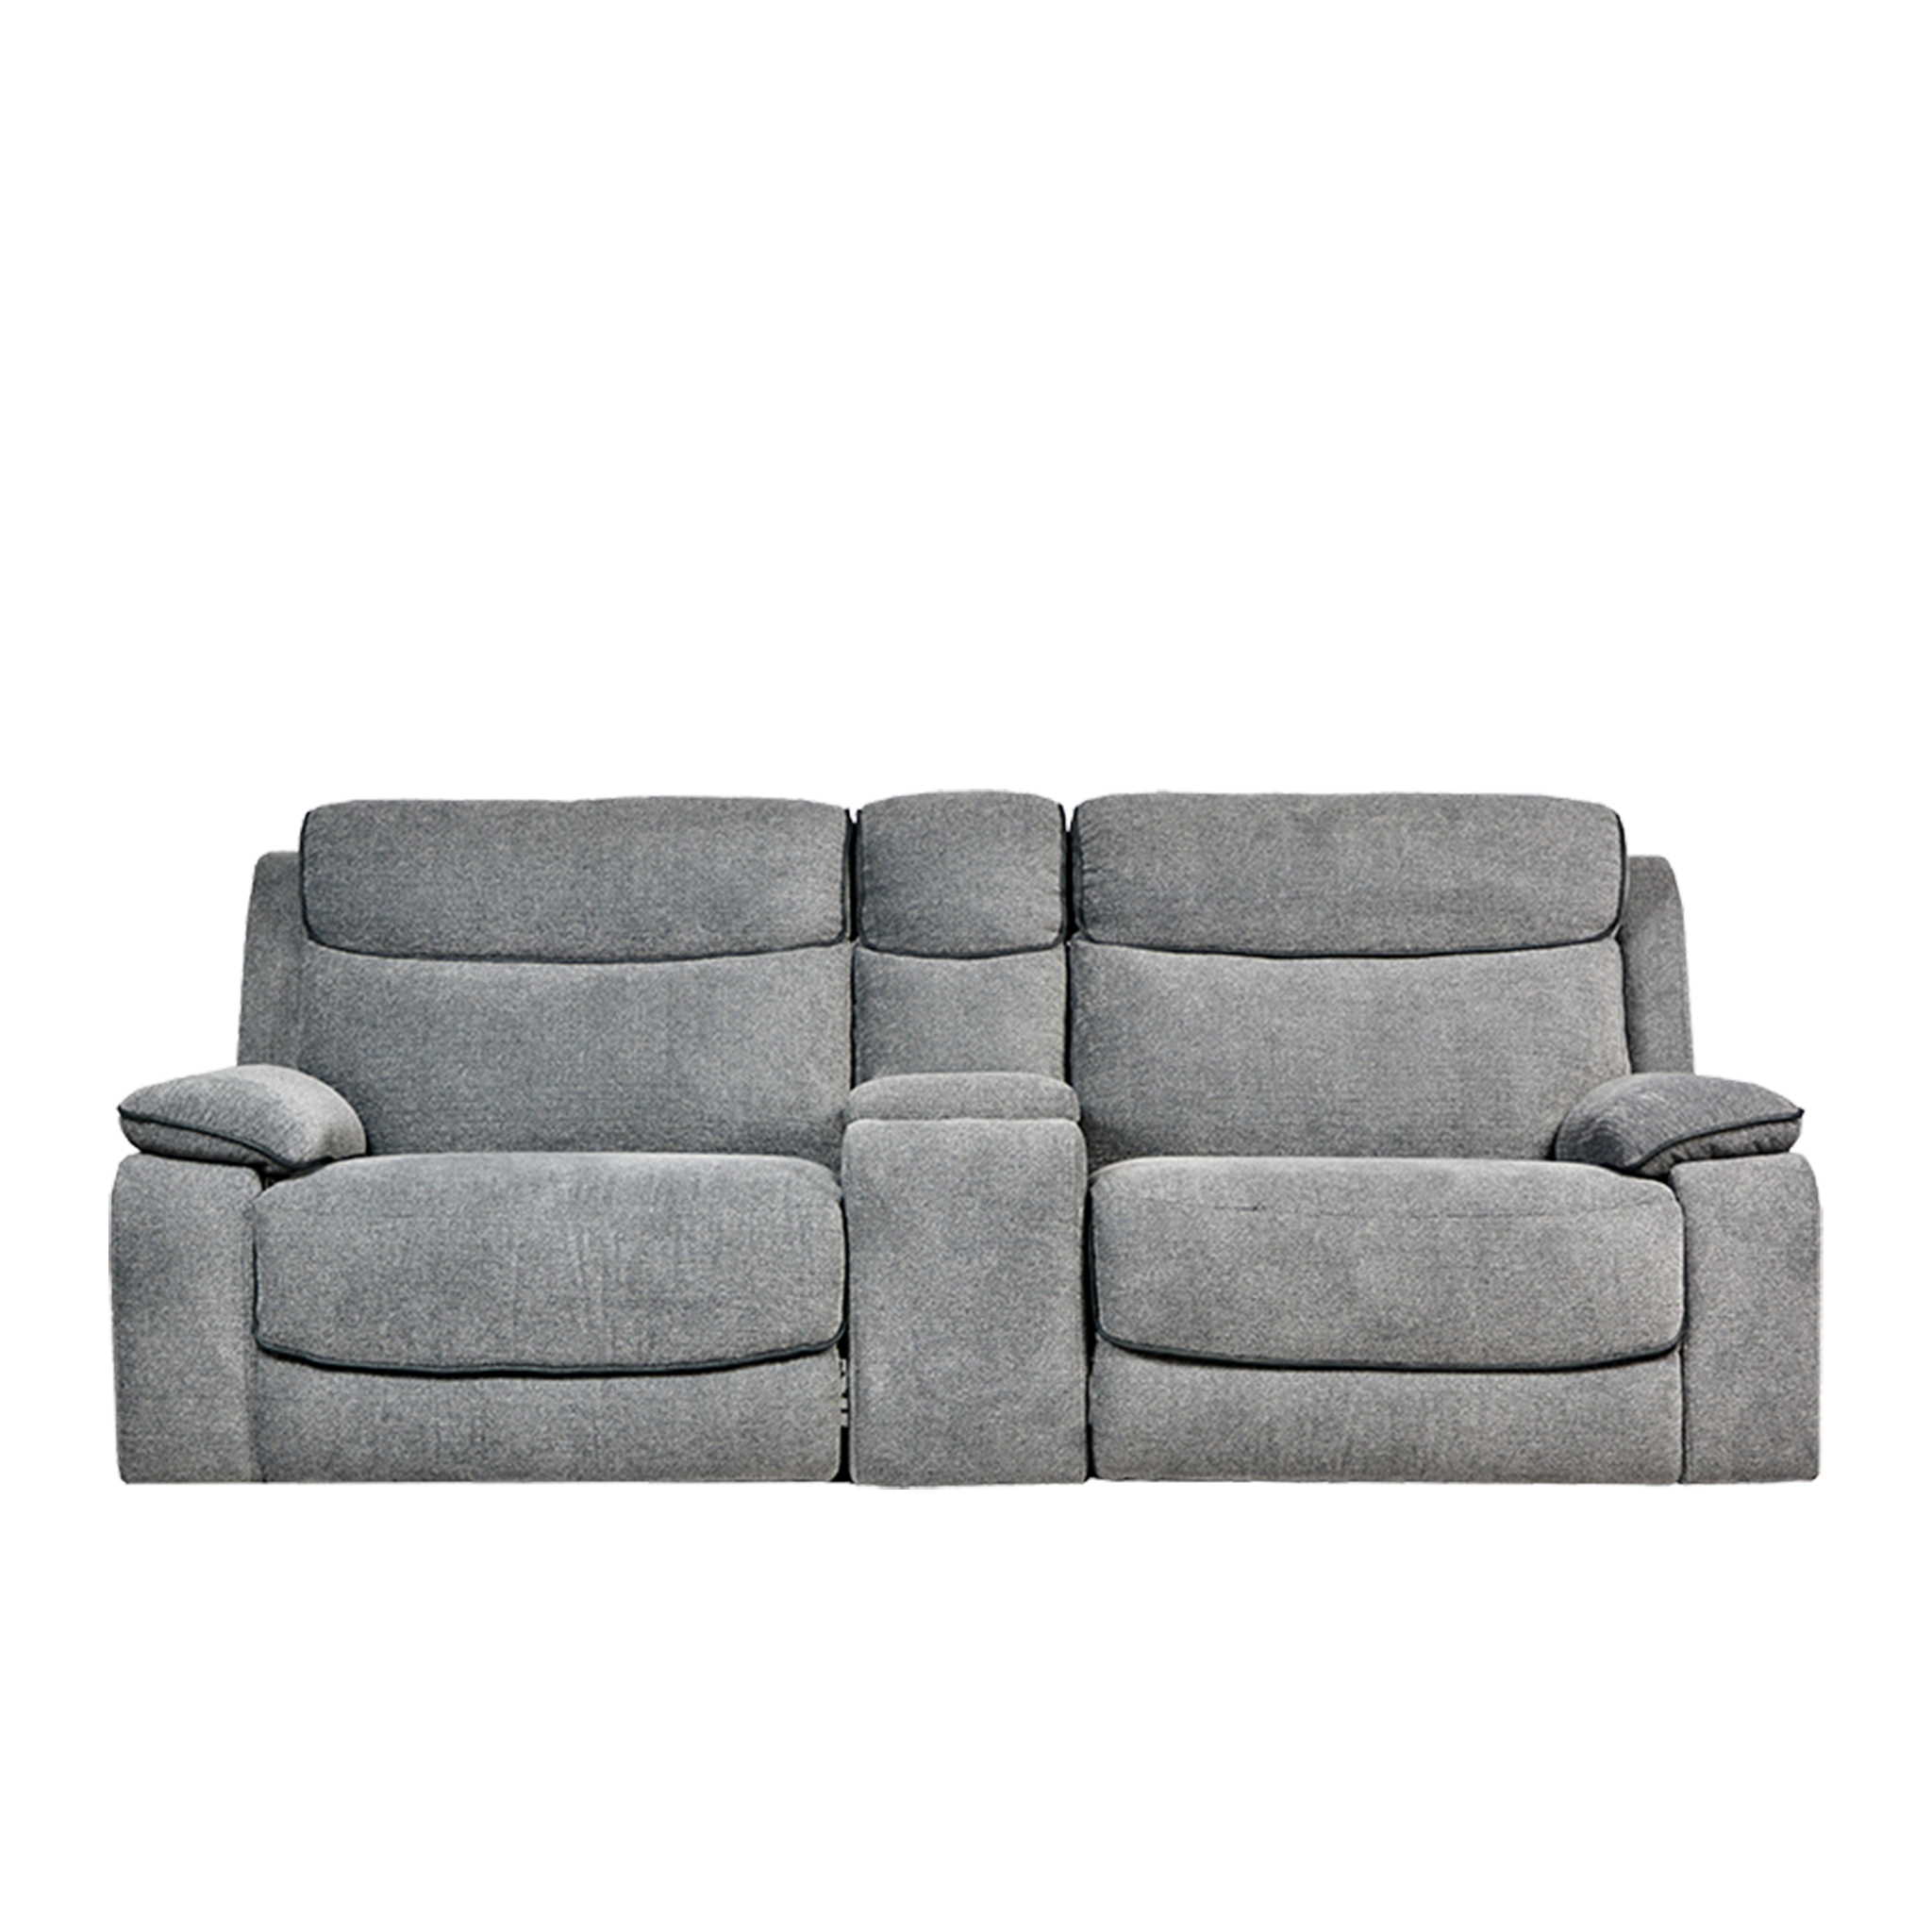 2 Seater Electric Recliner Sofa With